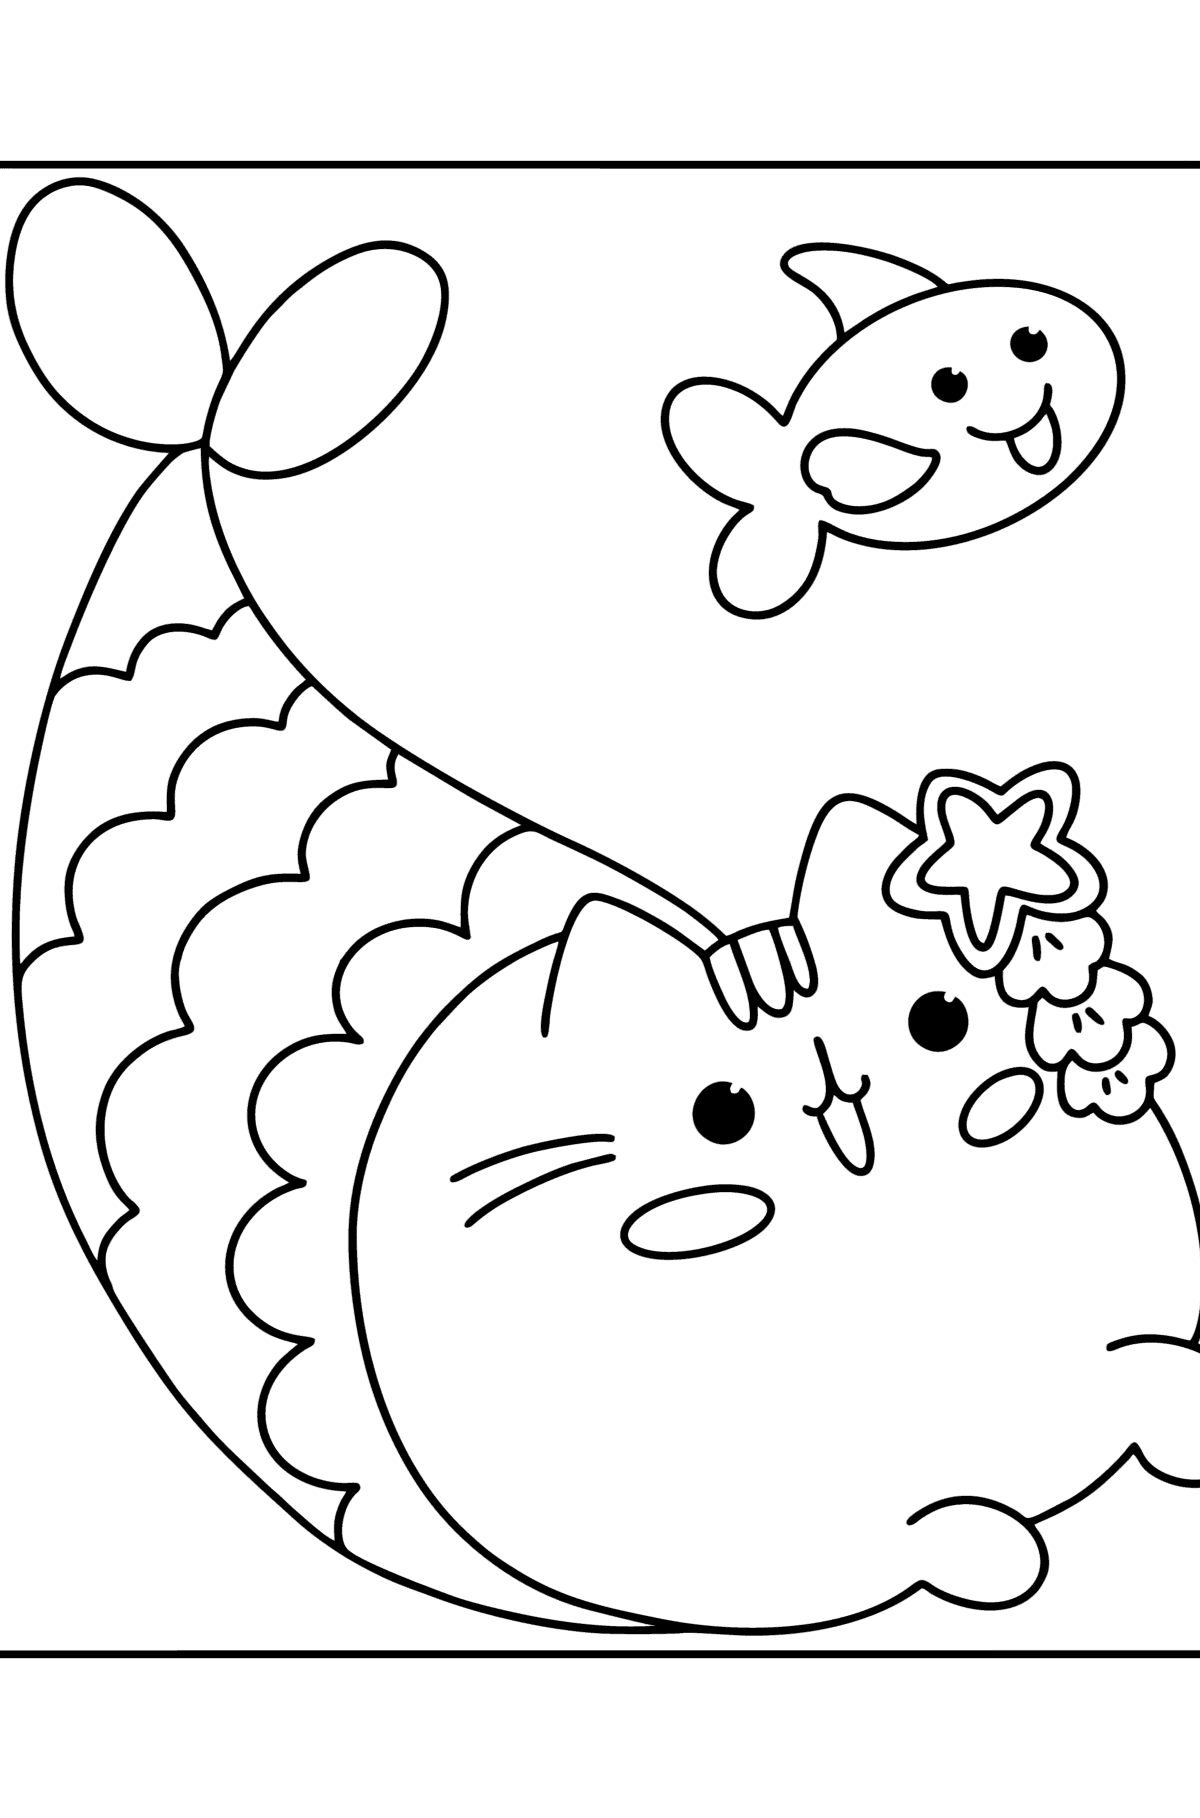 Pusheen mermaid сoloring page - Coloring Pages for Kids